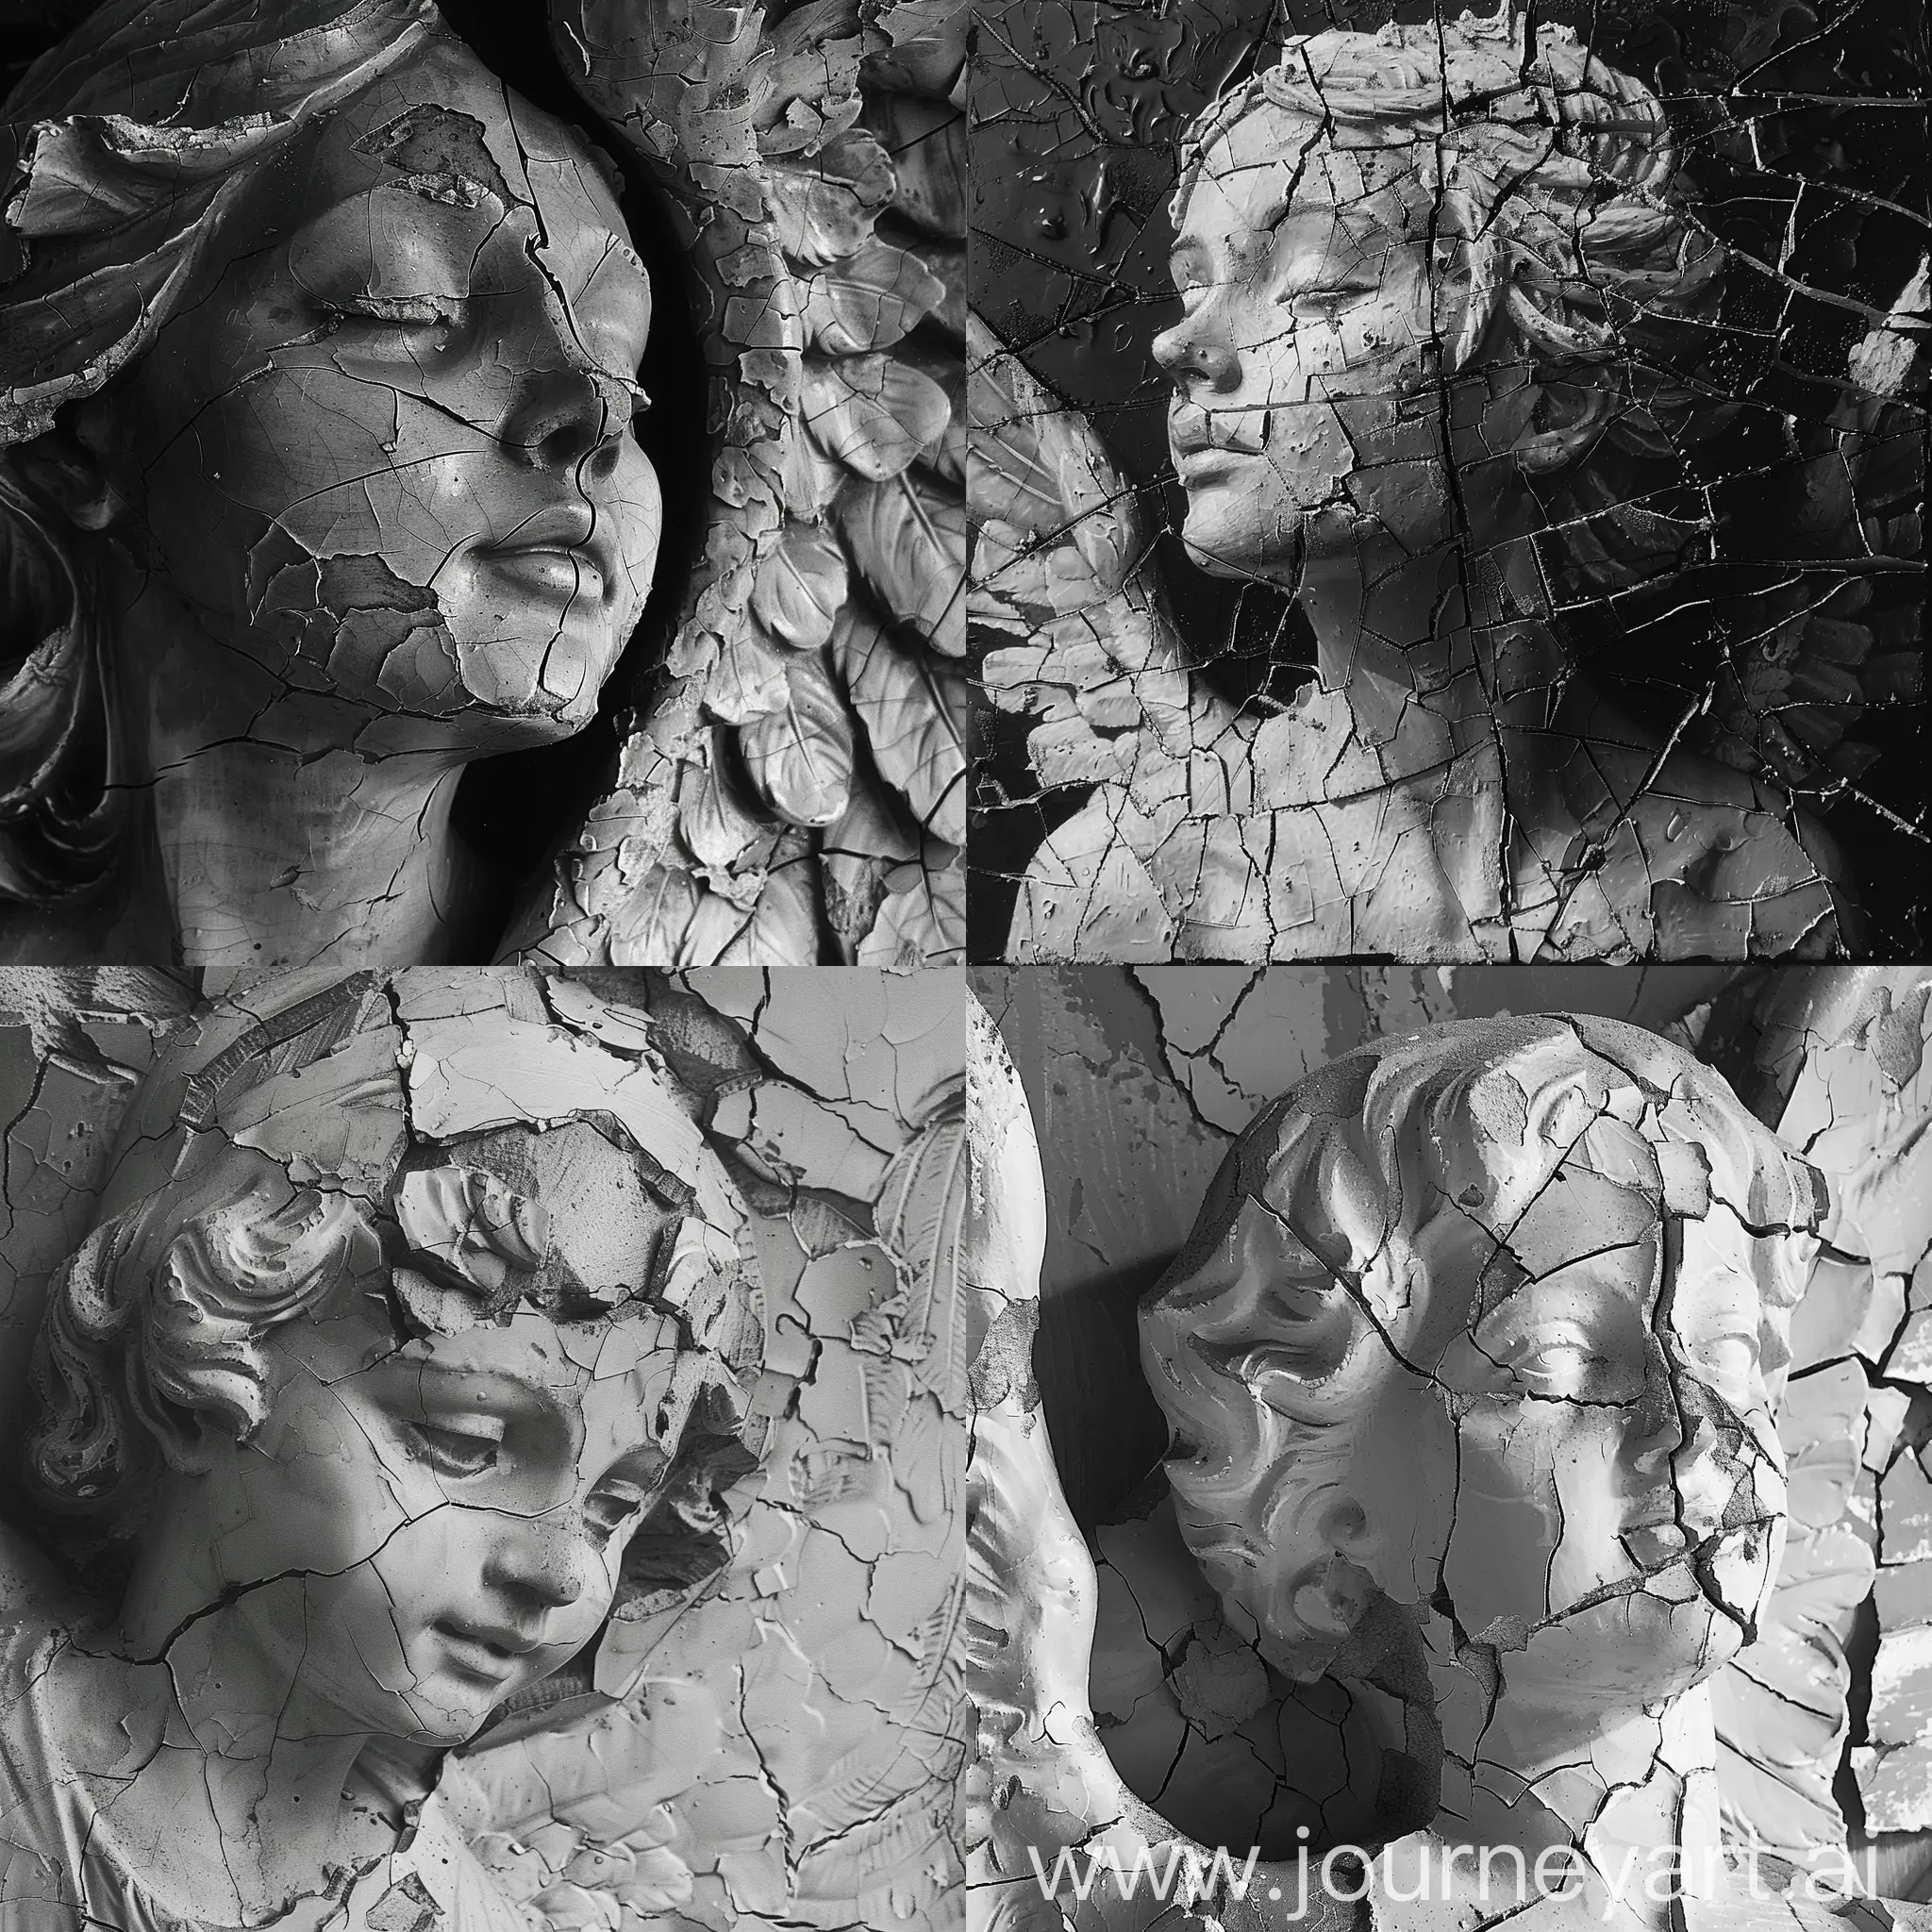 paint me a tempera style, black and white, stone sculpture of an angel, cracked and chipped by the ravages of time